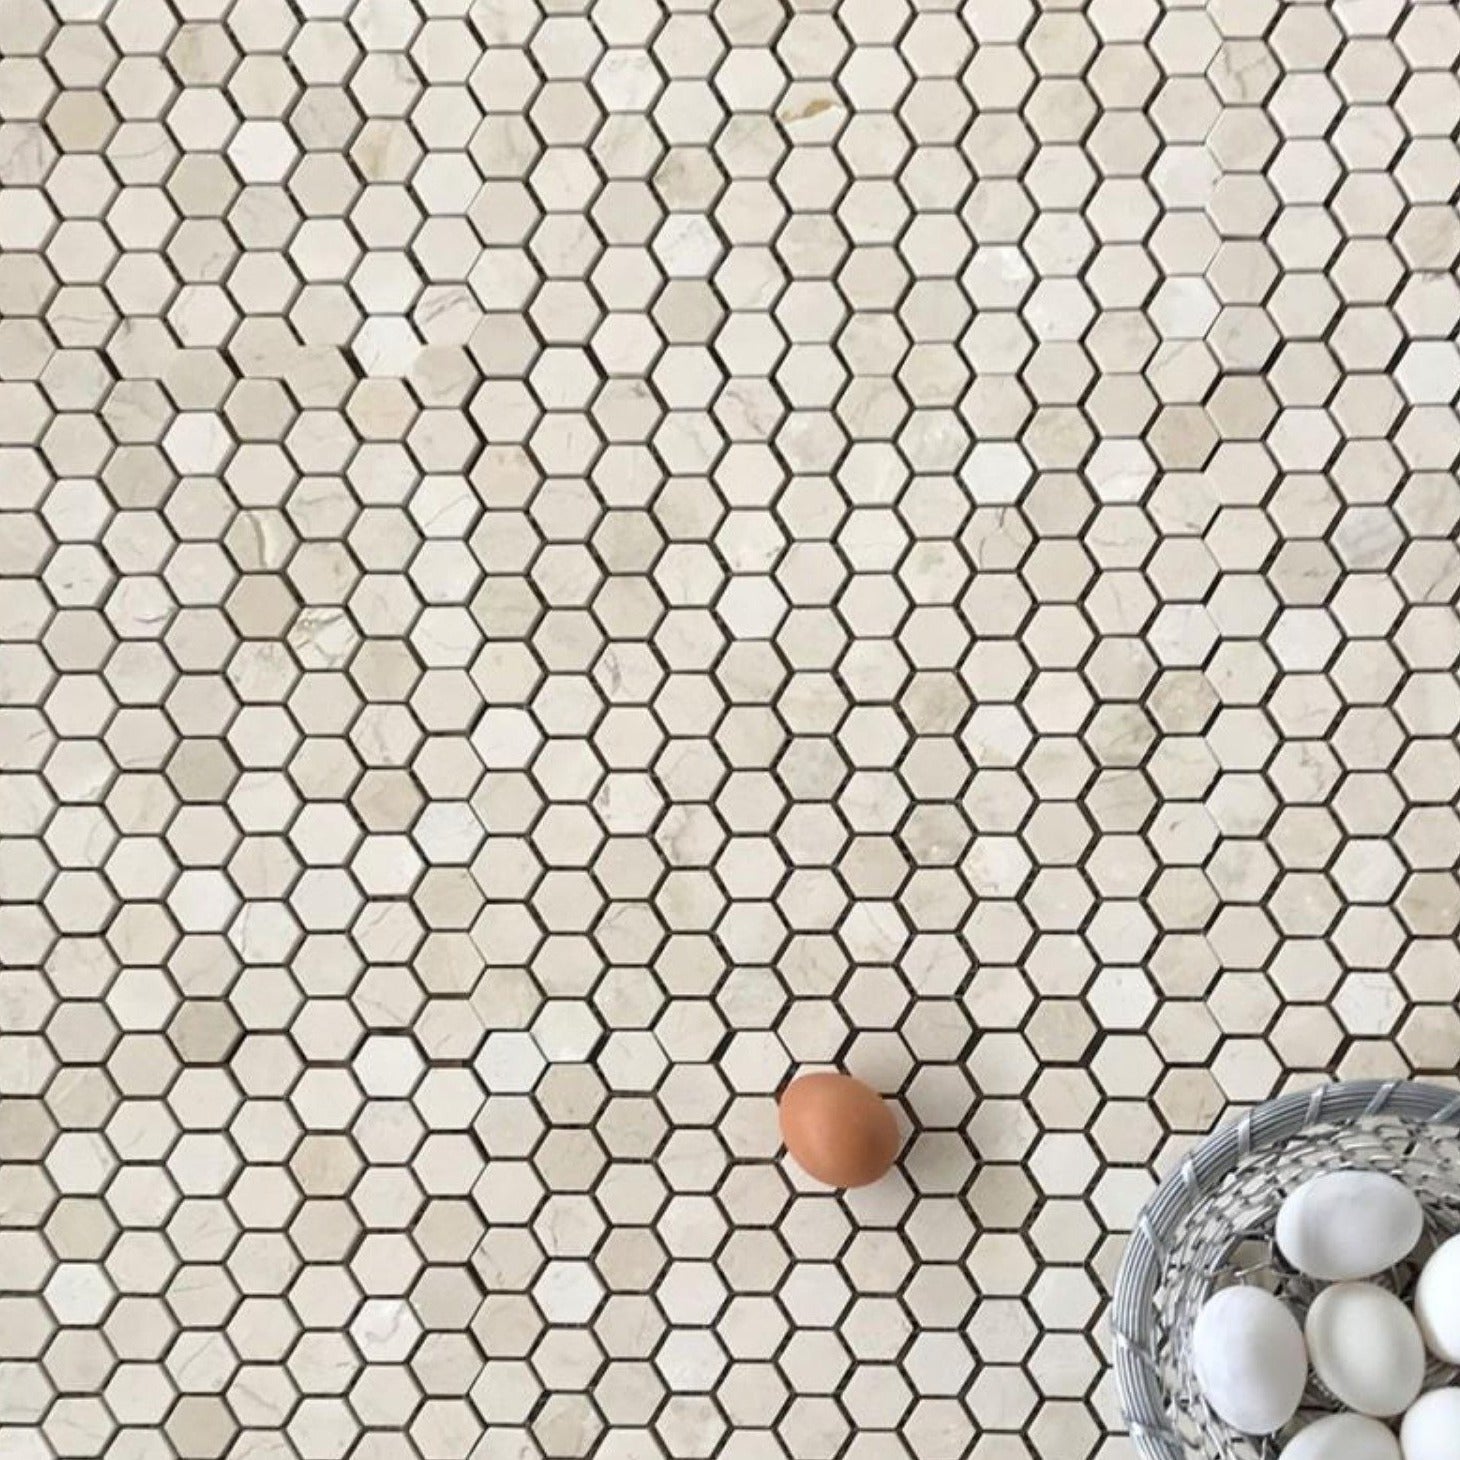 Crema Marfil 10 Inch Hexagon Honed Marble Tile